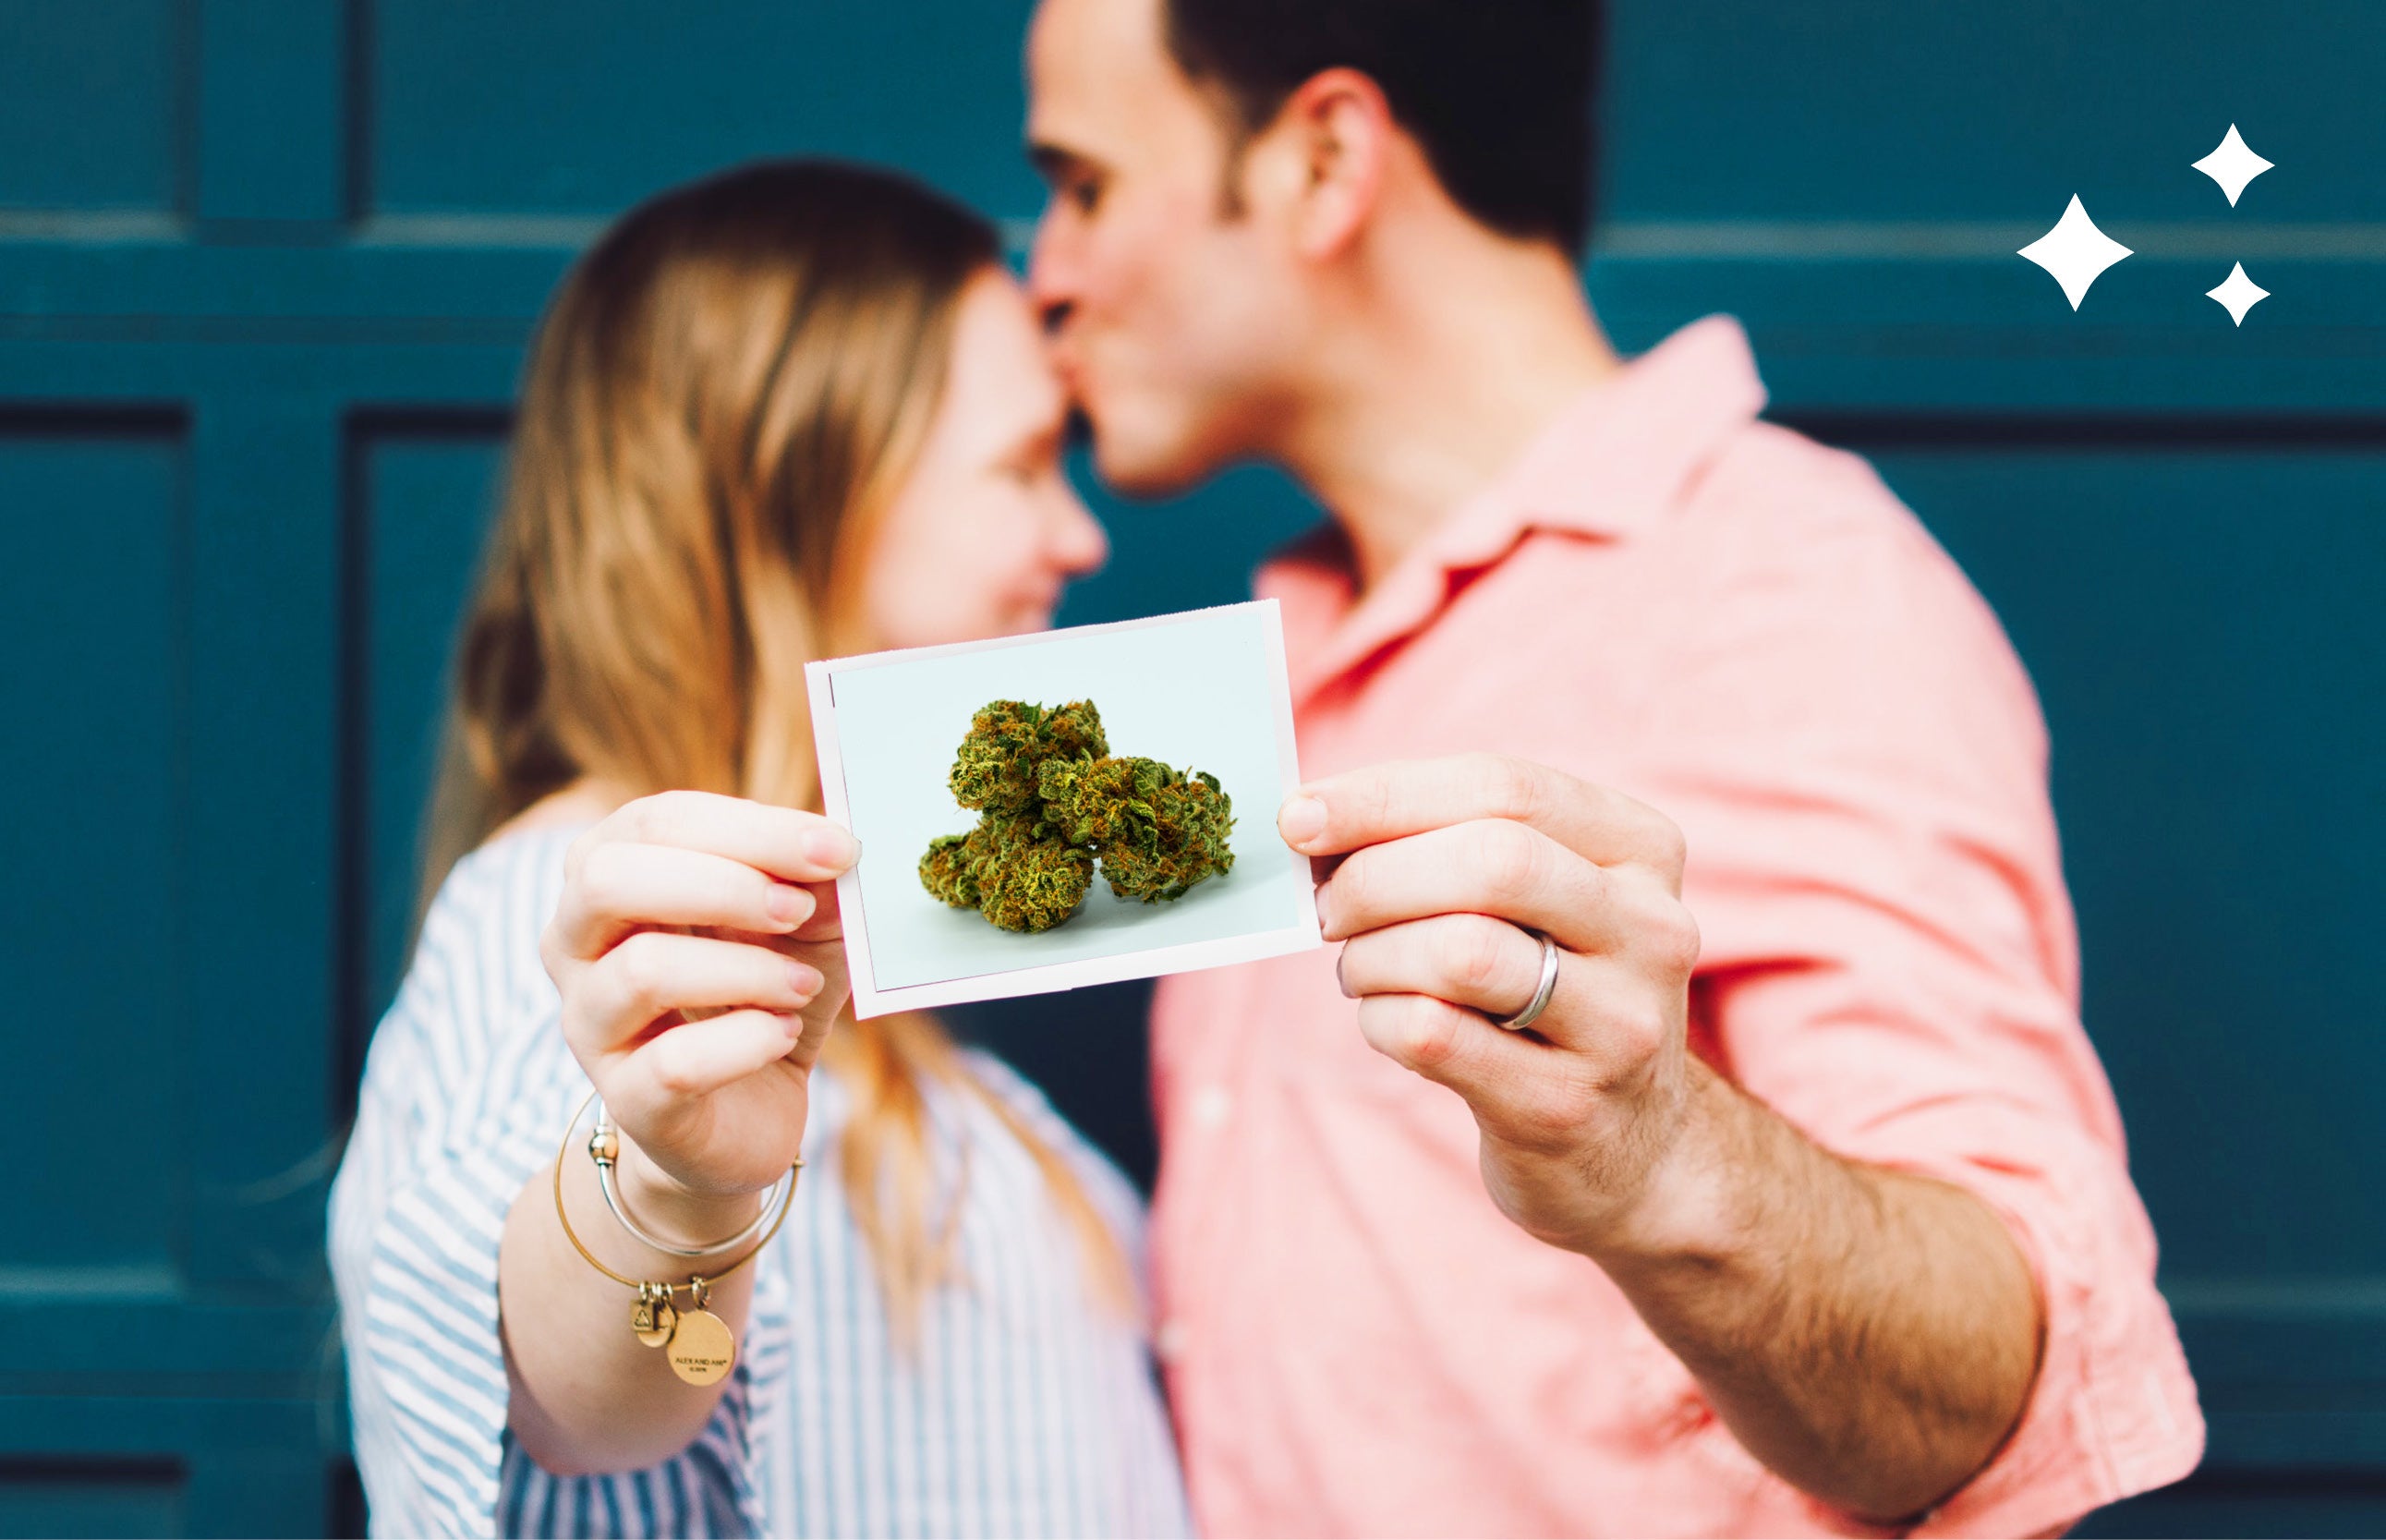 A couple kissing and holing up a picture of weed.